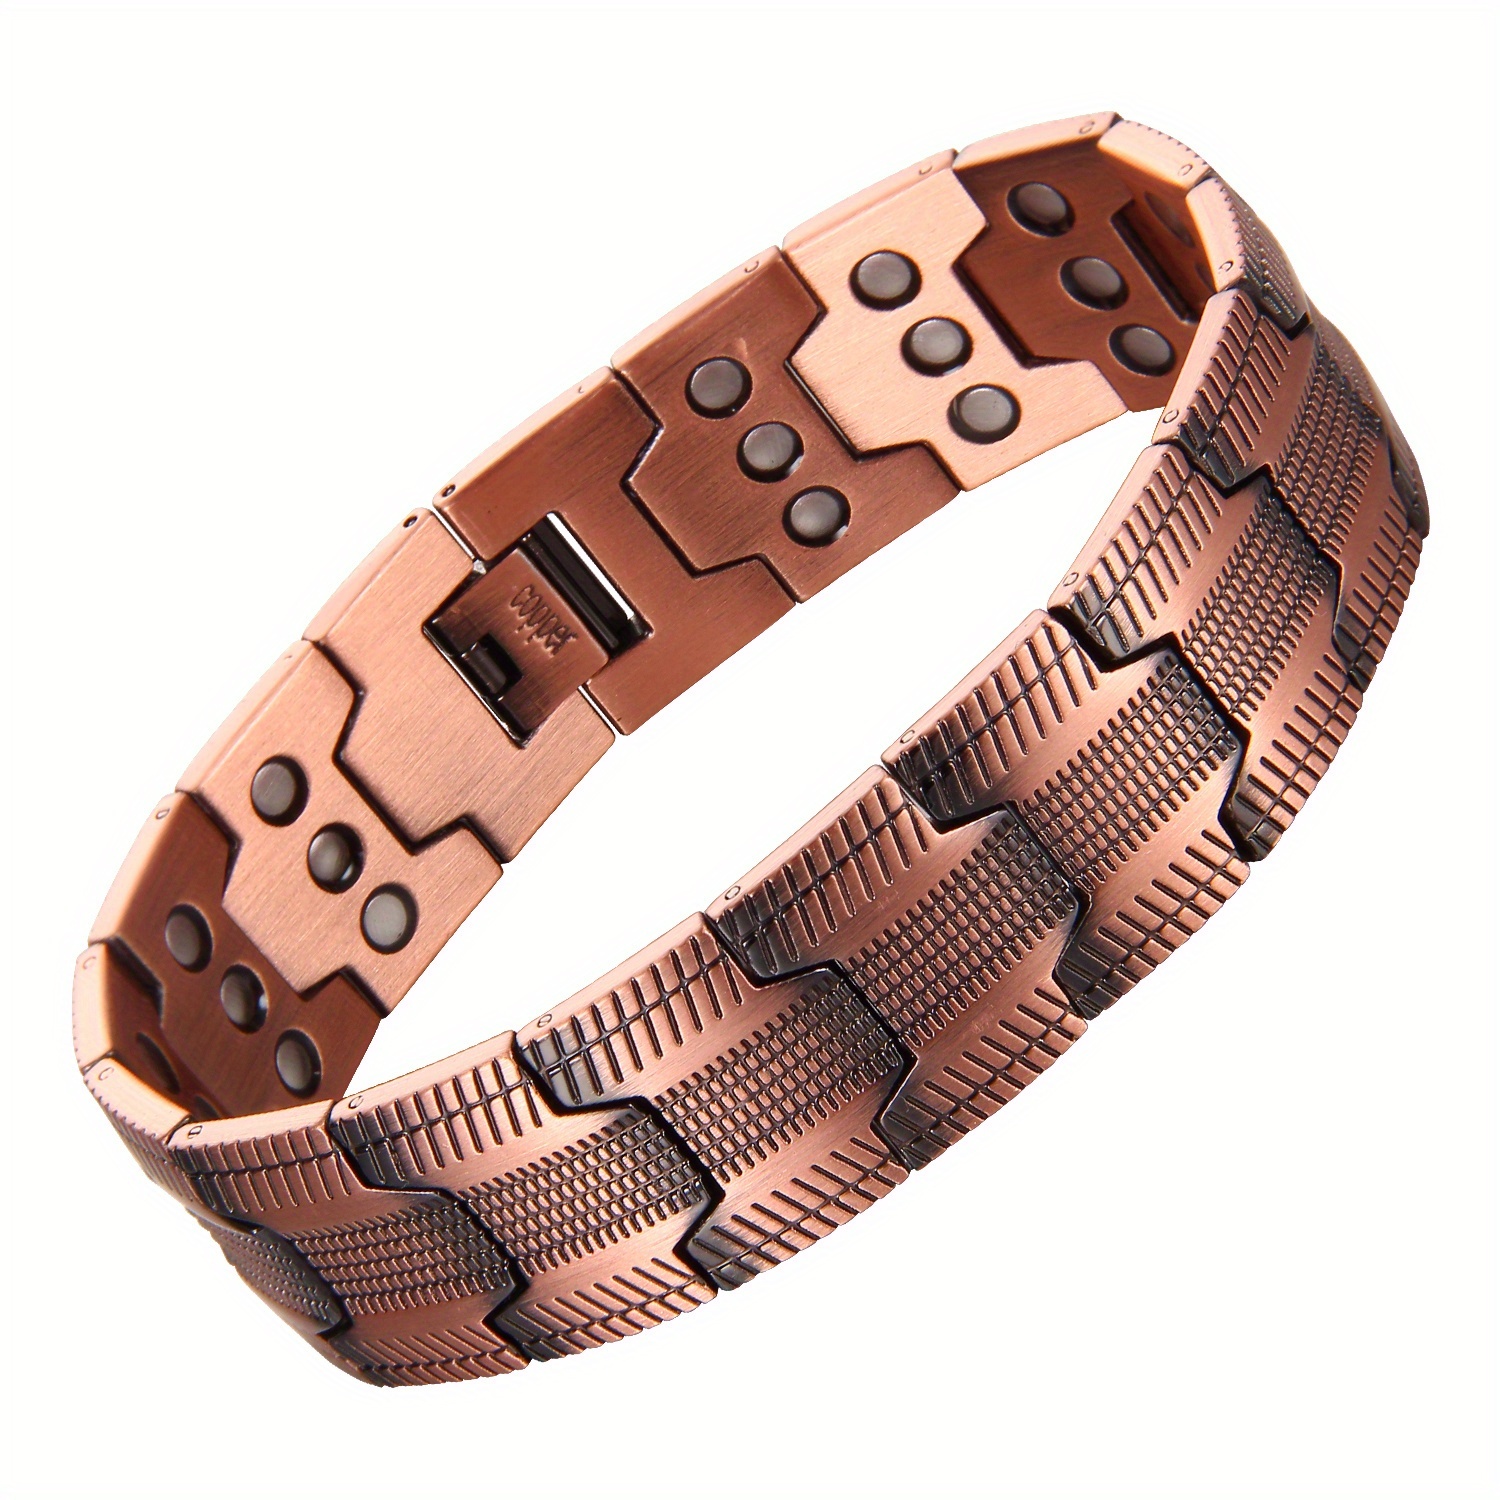 

1pc 3x Strength Copper Bracelets For Men, Pure Copper Magnetic Bracelet With 3 Row Neodymium Magnets Adjustable Length Bracelet, Jewelry Gifts For Men Father's Day